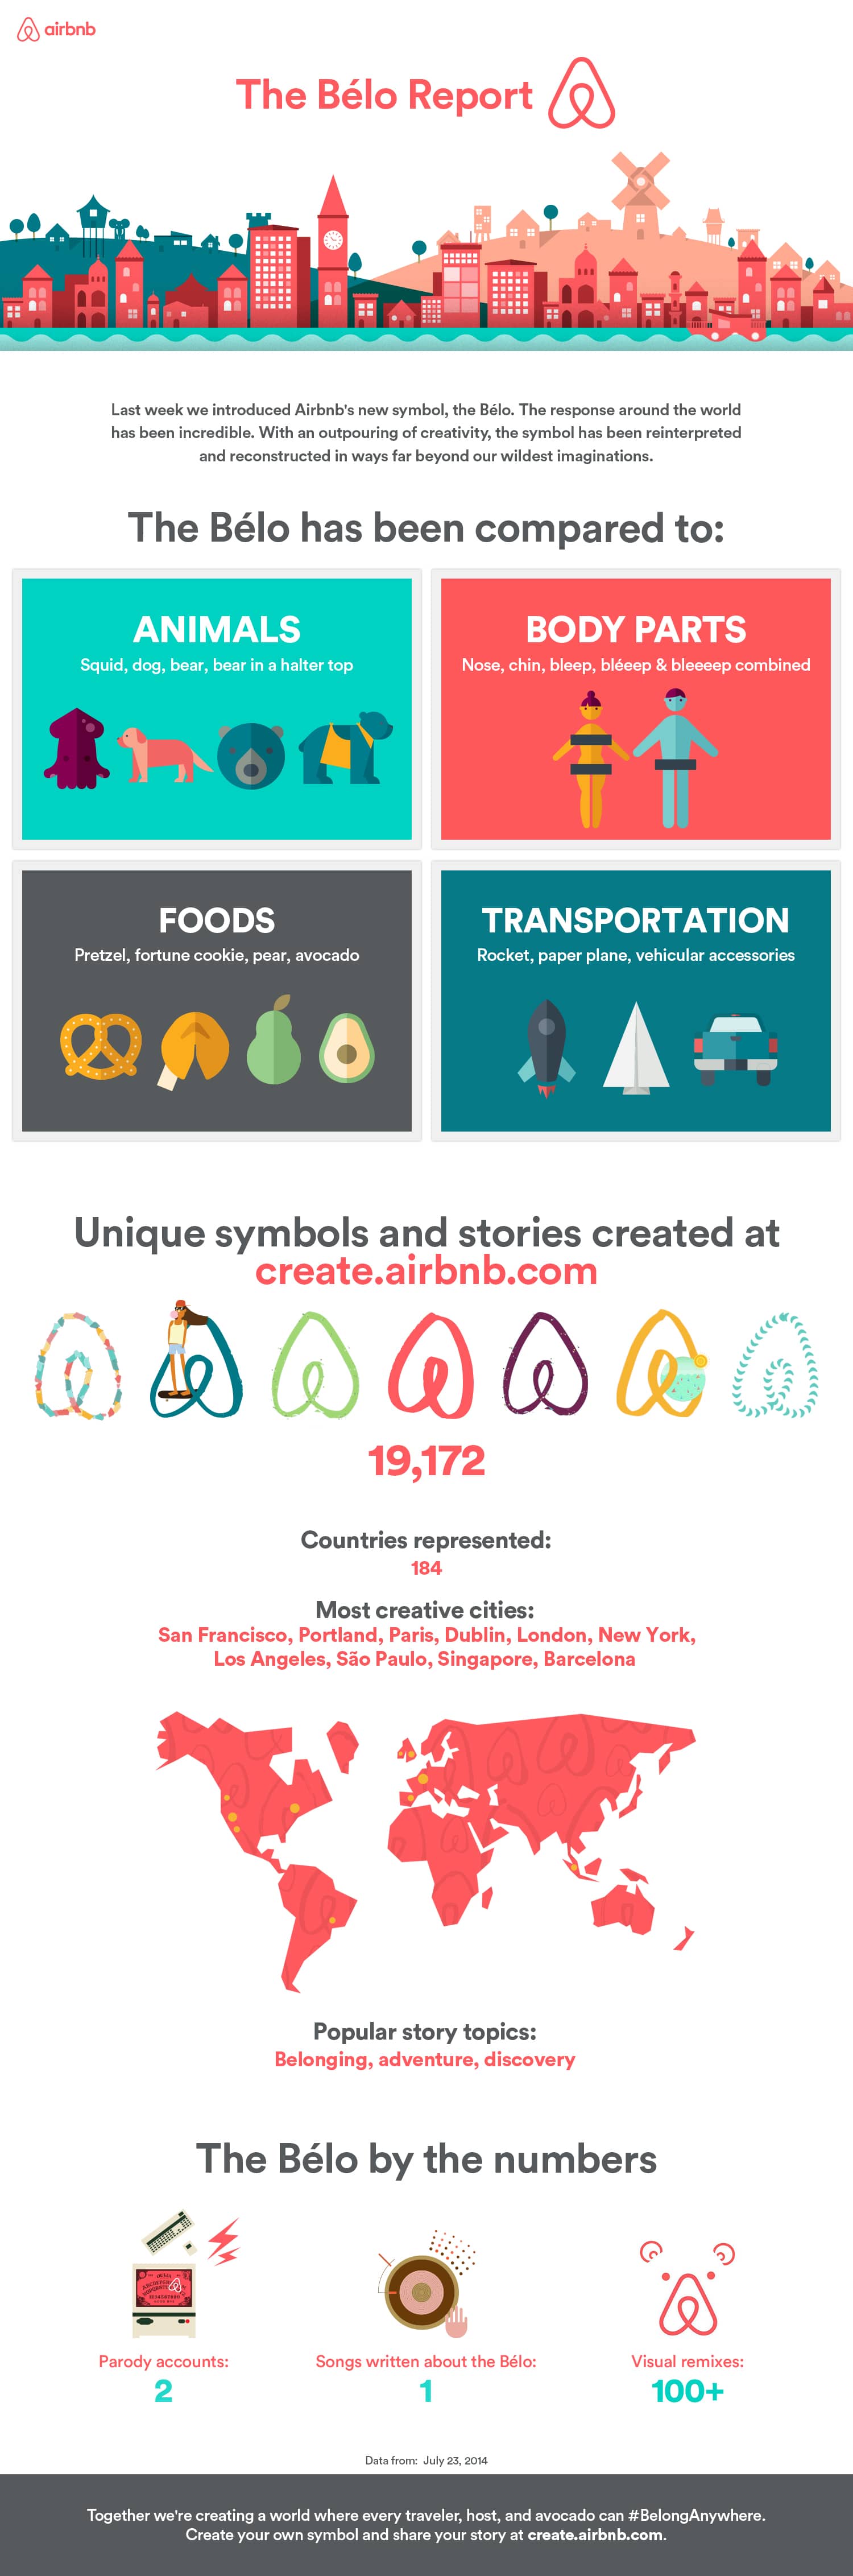 Airbnb_Belo_infographic